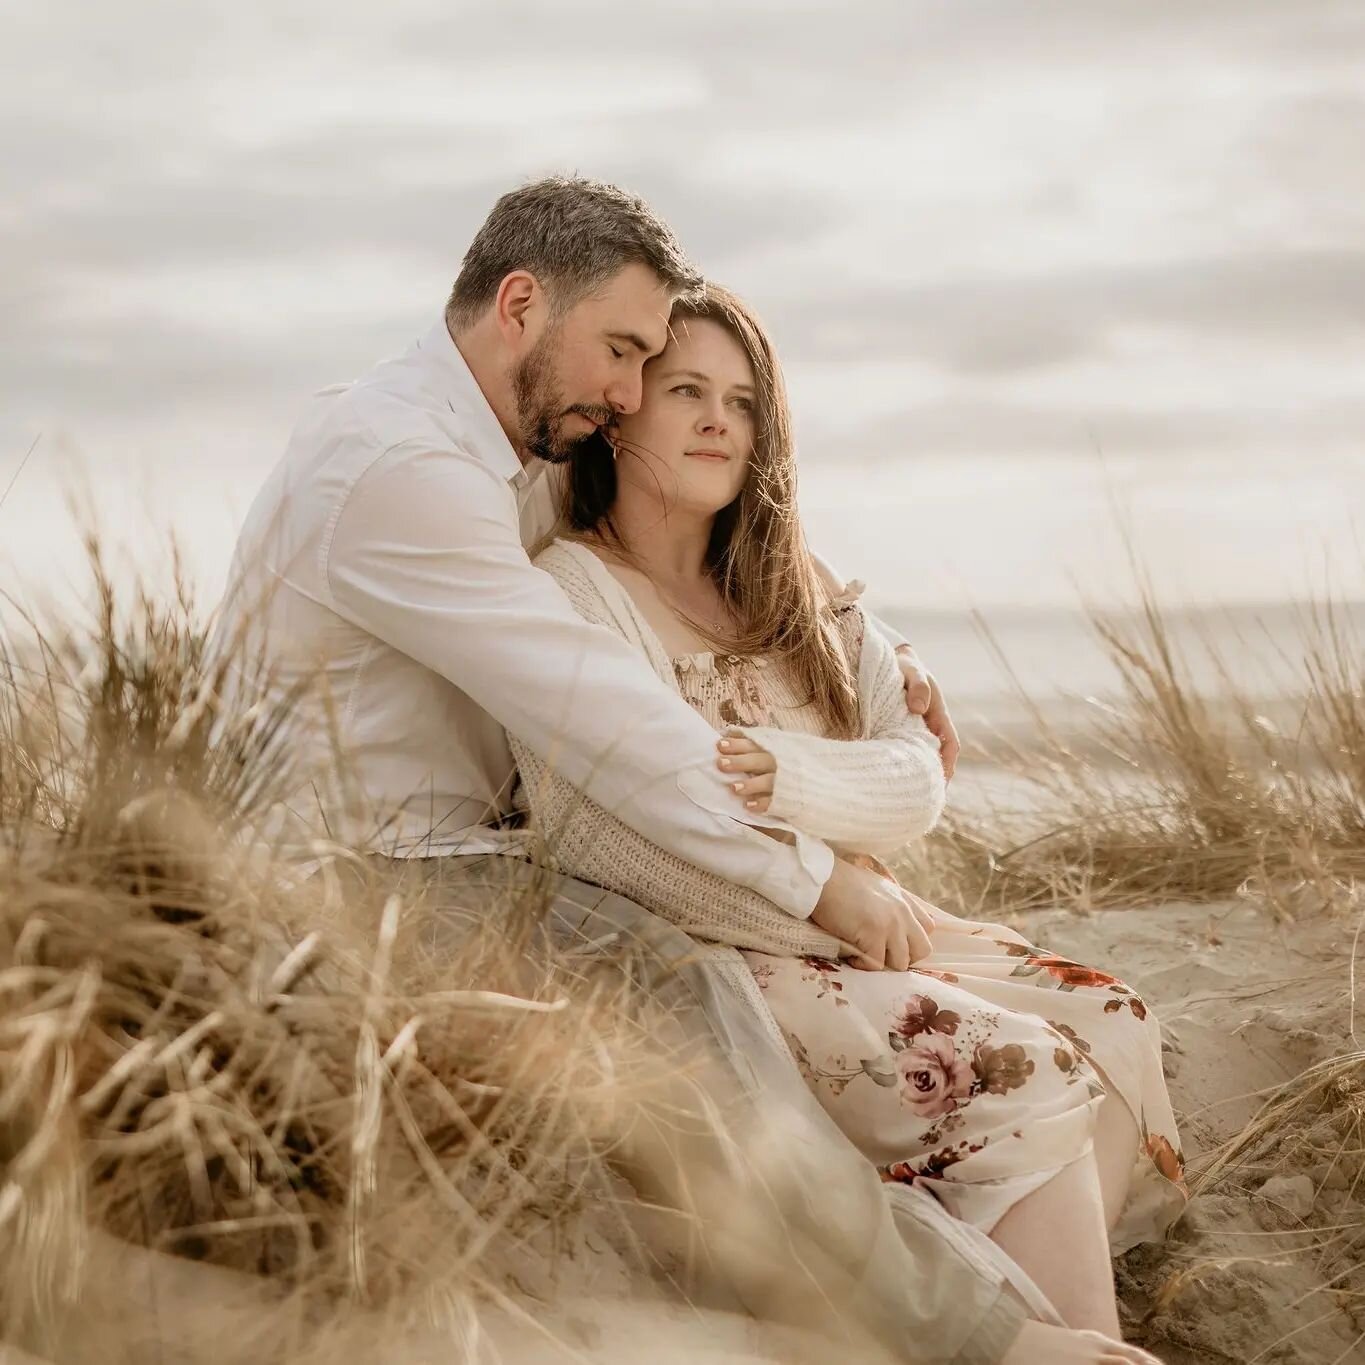 Sandy Sunday.

Last weekend I had the absolute pleasure to meet and photograph Lucy and Alonso.

Their wedding is coming up in April and I can't wait, but before then we managed to get together for this amazing session. Lucy suggested the location, a